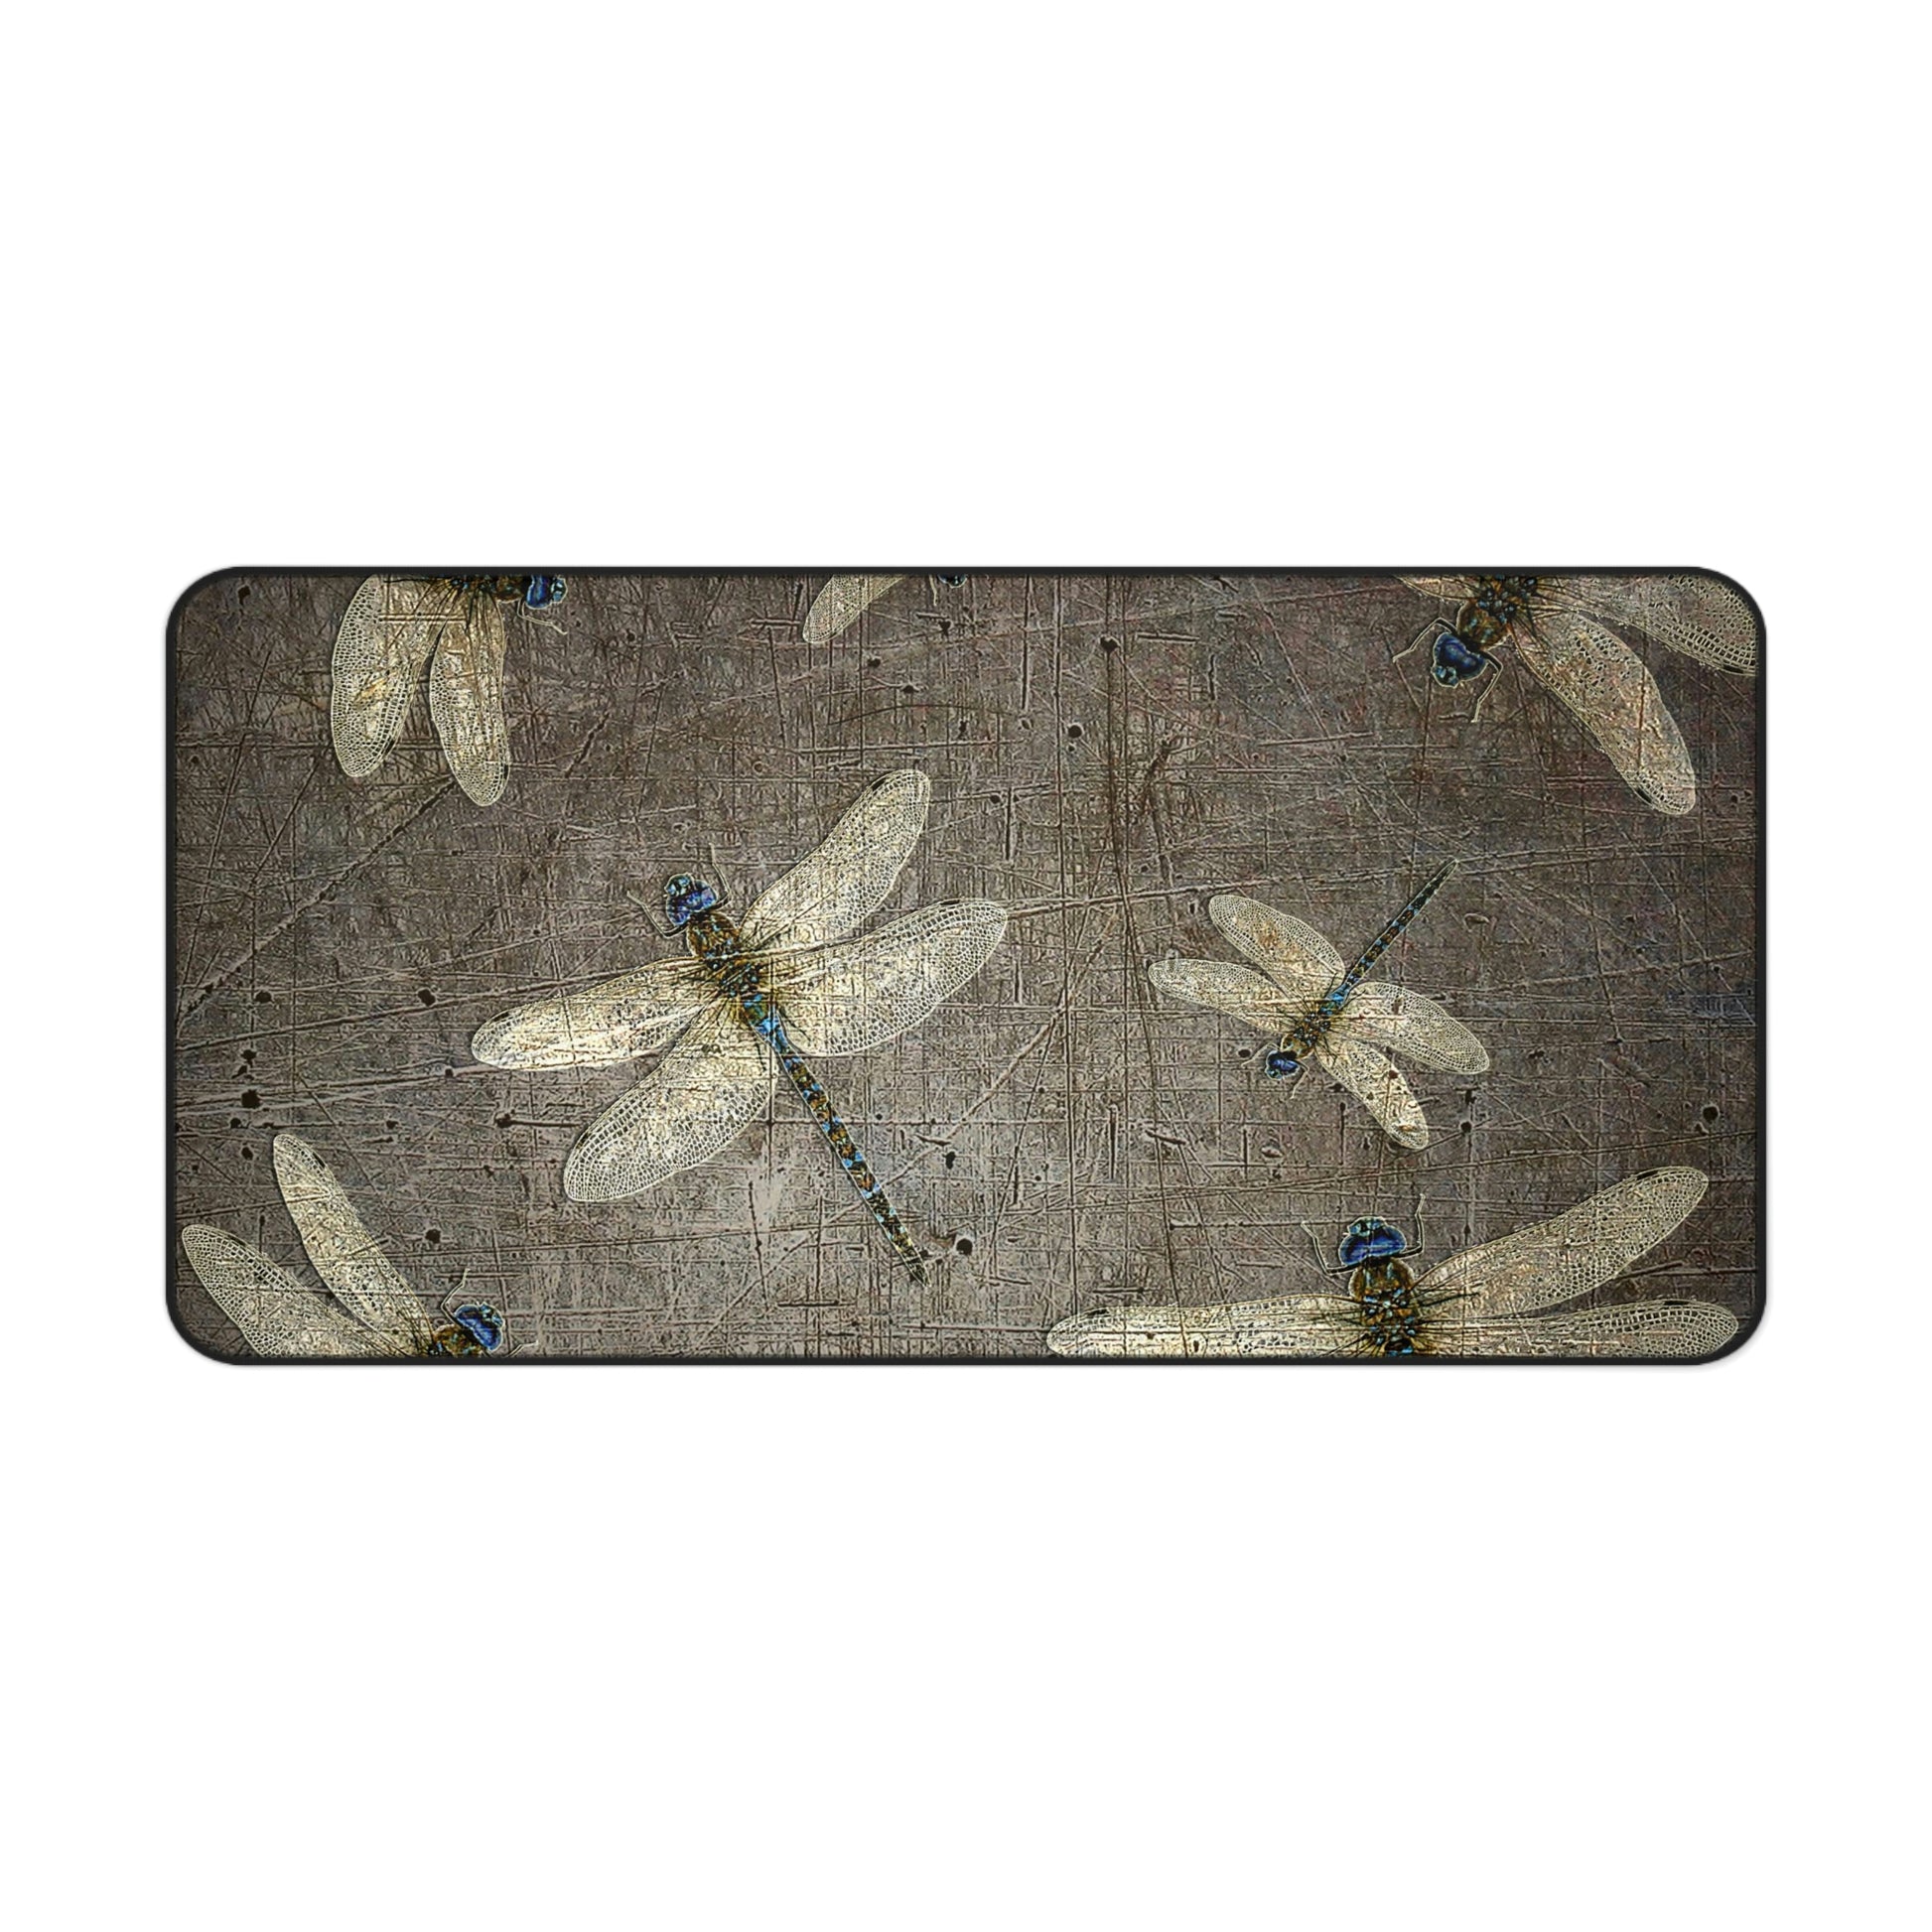 Dragonfly Desk Mat - Flight of Dragonflies on Distressed Grey Background Print 15.5x31 in situ